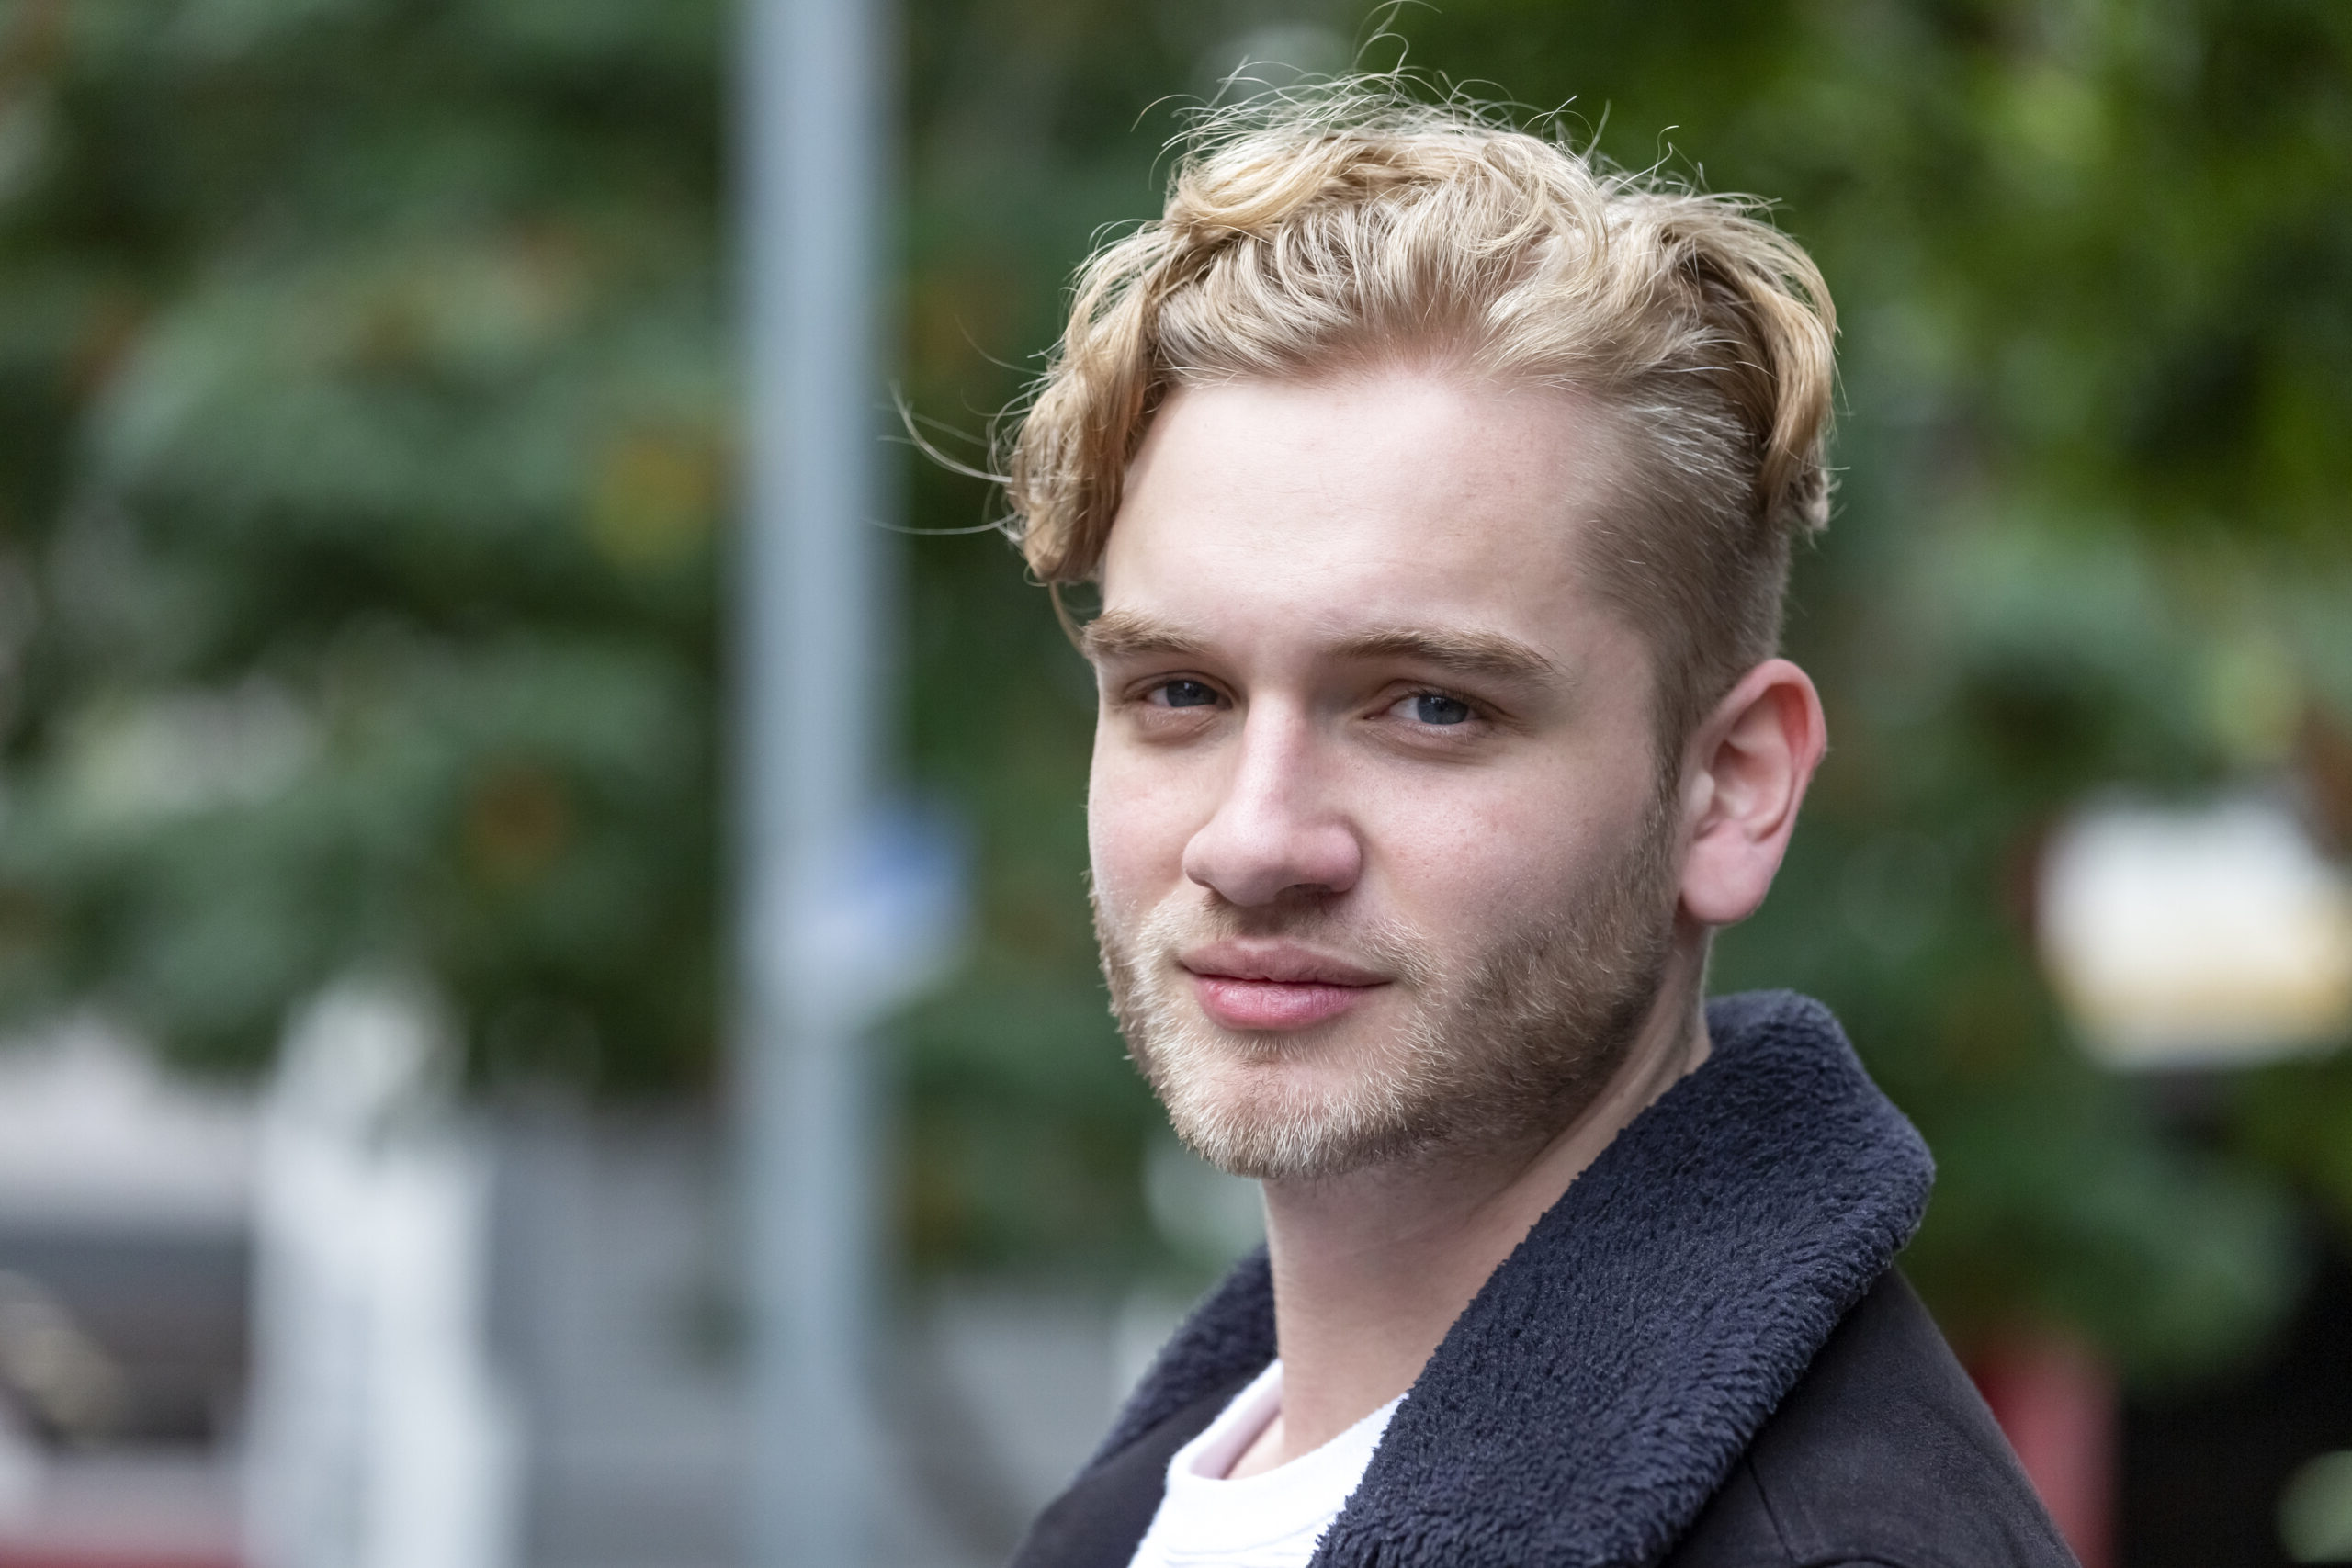 the photo shows a young man outdoors, who has blond hair and a trimmed beard, he is looking straight at the camera with a slight smile